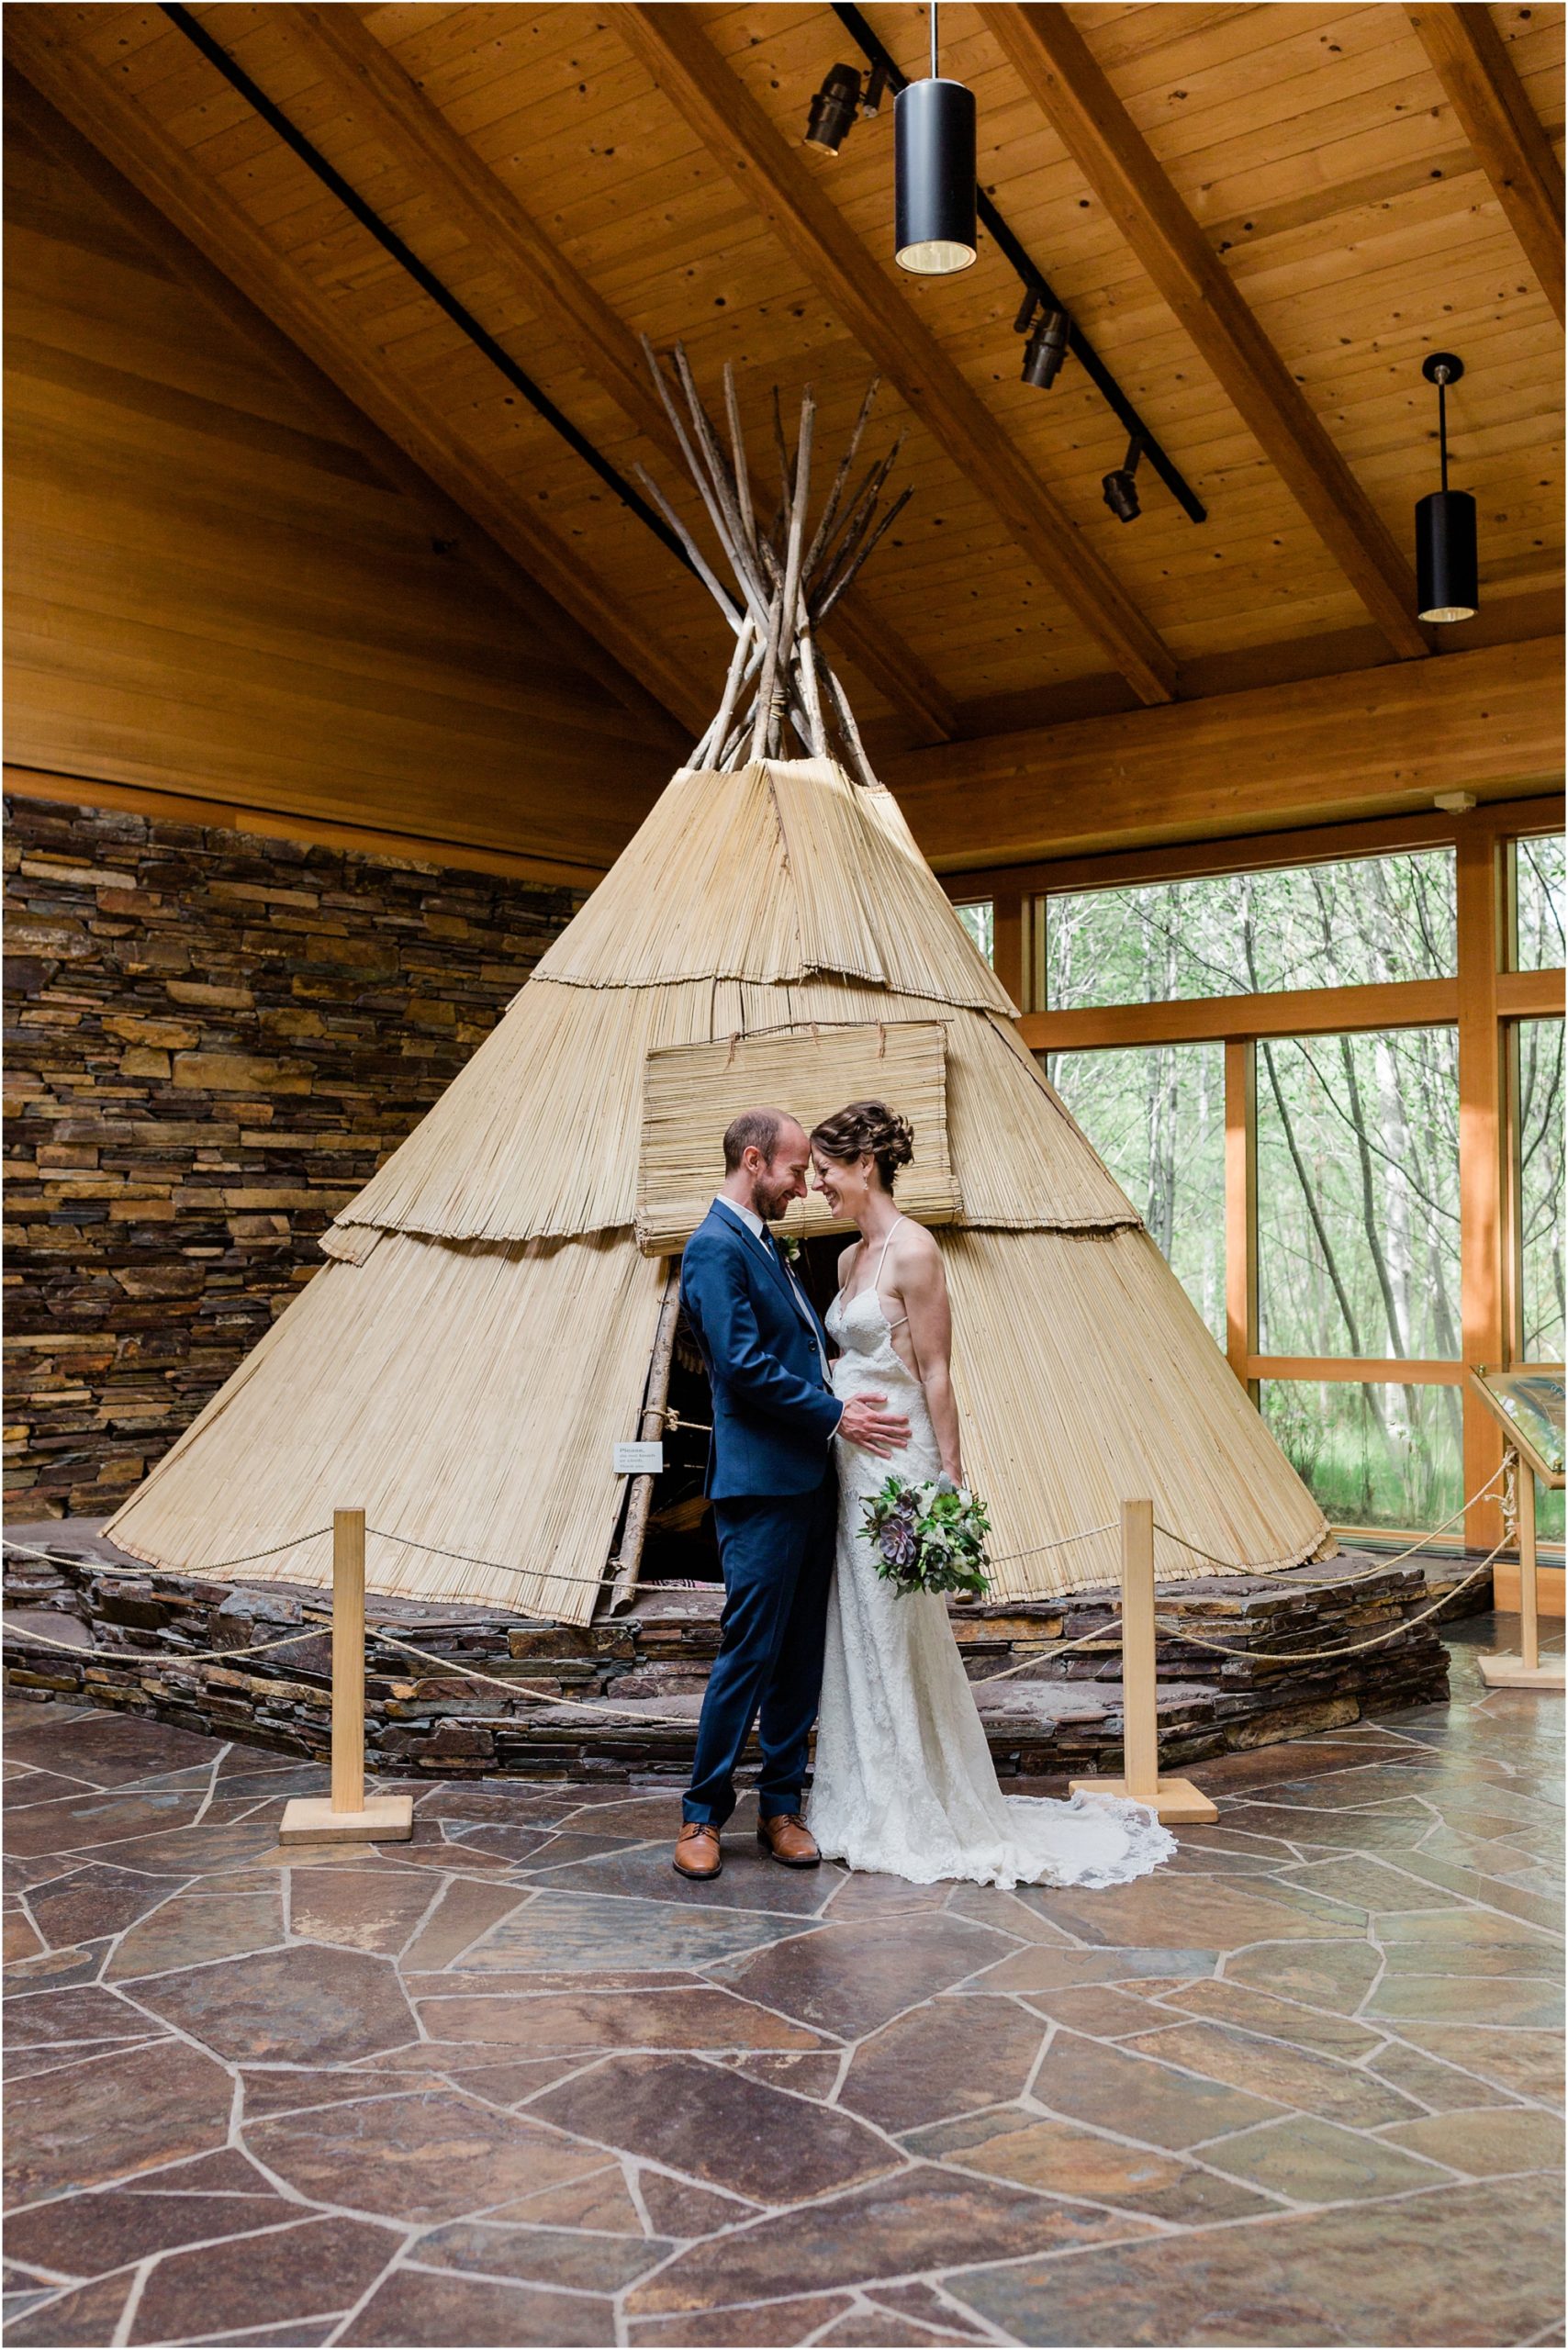 The tepee inside the High Desert Museum is a lovely background for a bride and groom to pose during their wedding celebration at the High Desert Museum in Oregon. | Erica Swantek Photography